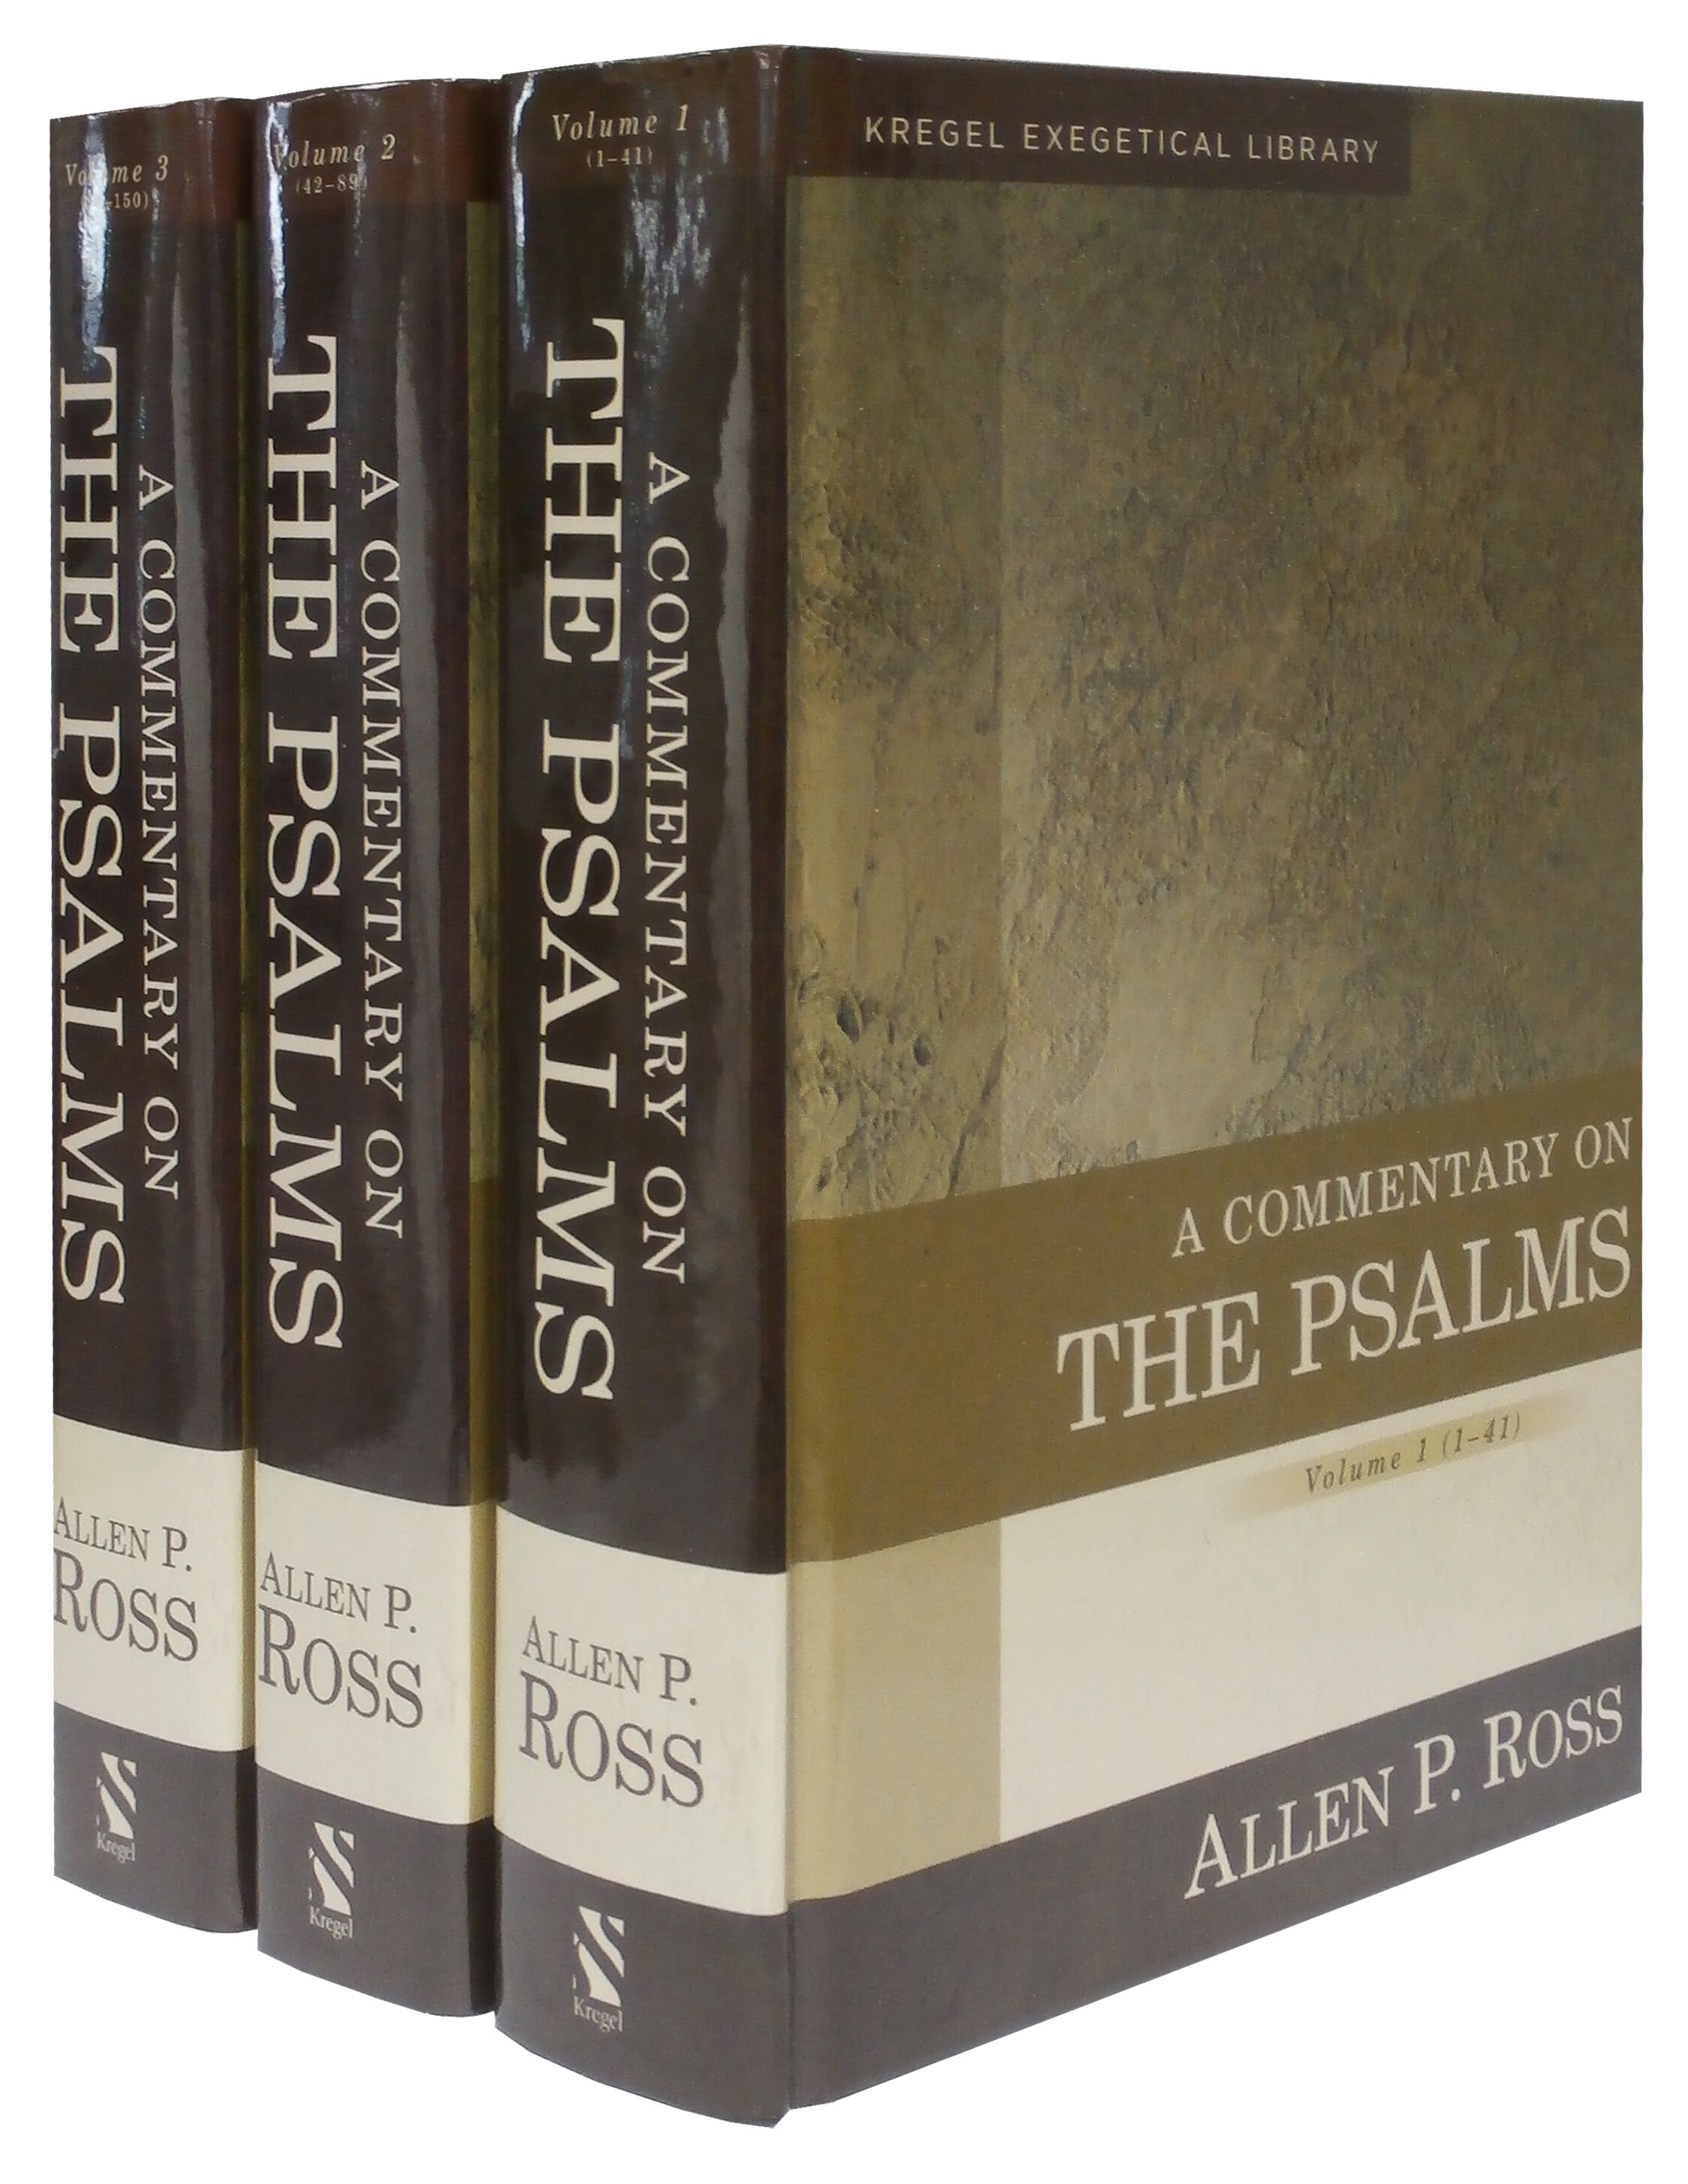 A Commentary on the Psalms, 3 vols. (Kregel Exegetical Library)